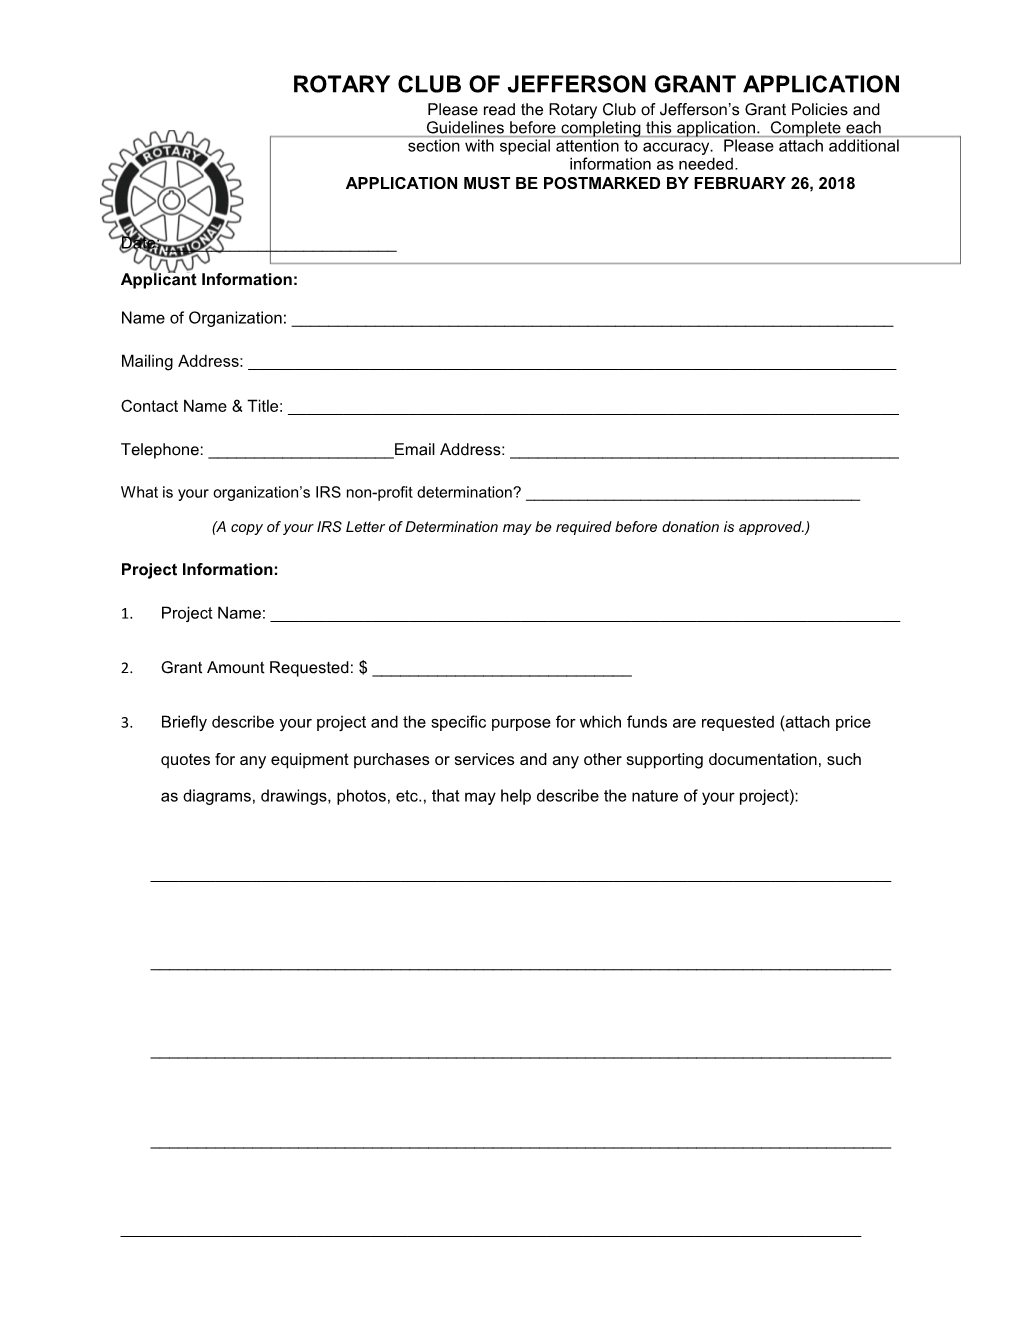 Application Must Be Postmarked by February 26, 2018